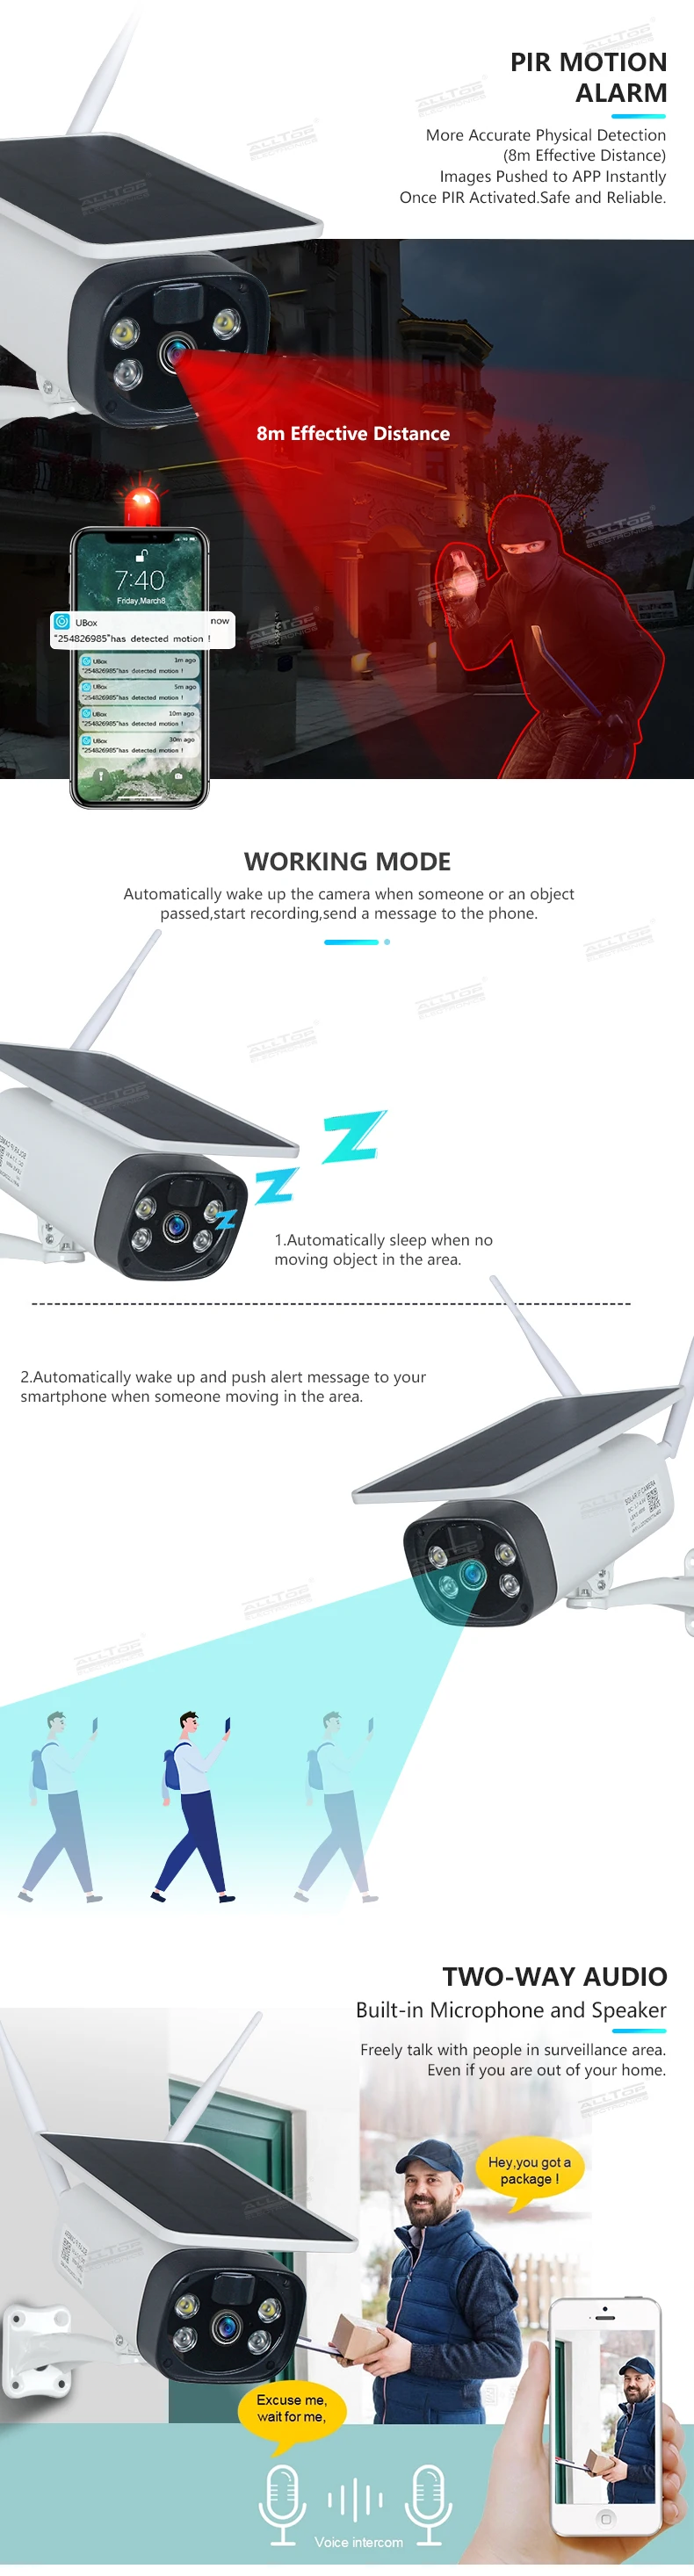 ALLTOP Hot Sale Low Consumption Security HD Surveillance CCTV Battery Powered Wireless Wifi Solar Power IP Camera